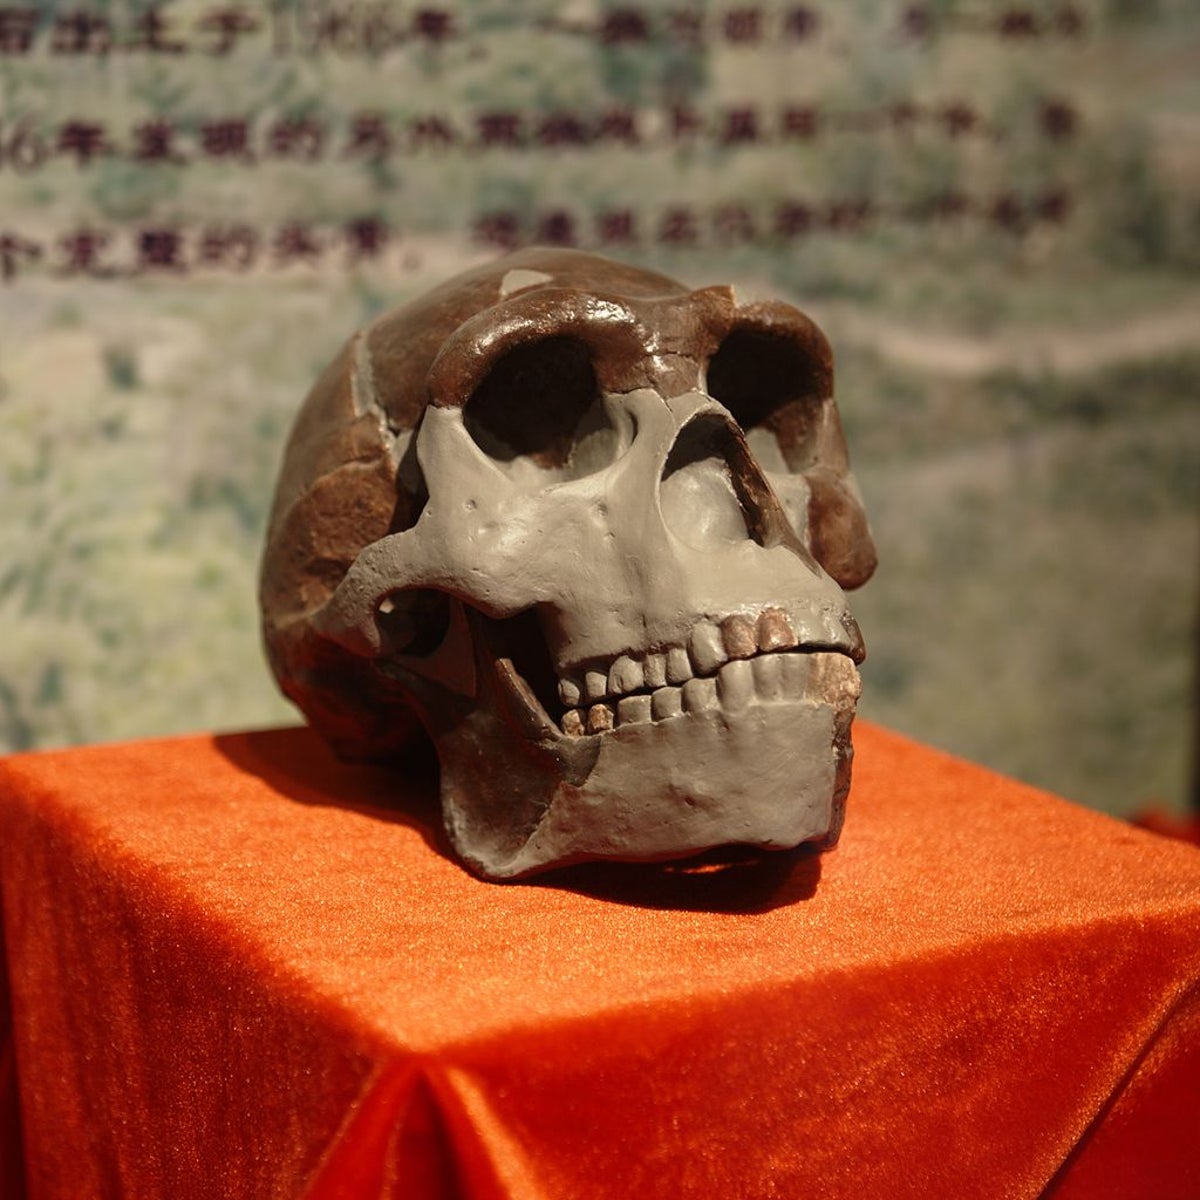 How China Is Rewriting the Book on Human Origins